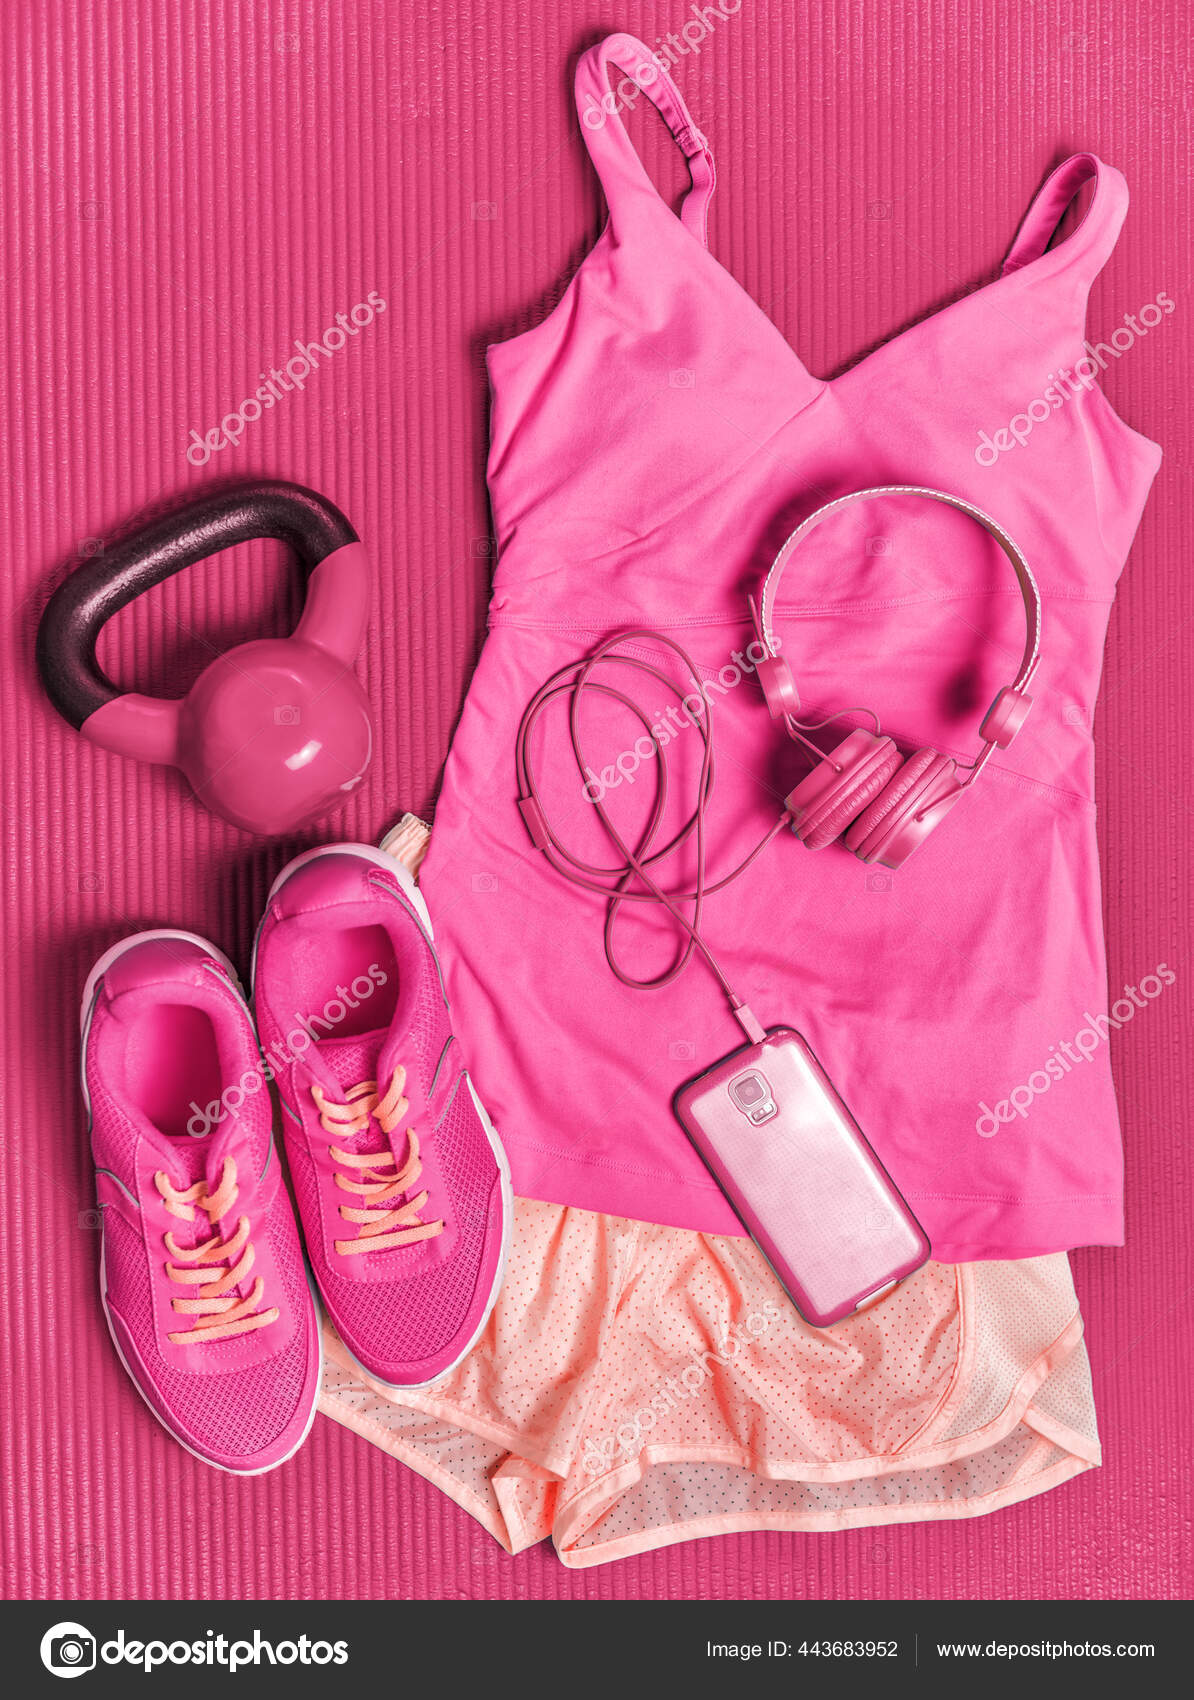 Activewear fitness clothes outfit - girly pink fashion sportswear